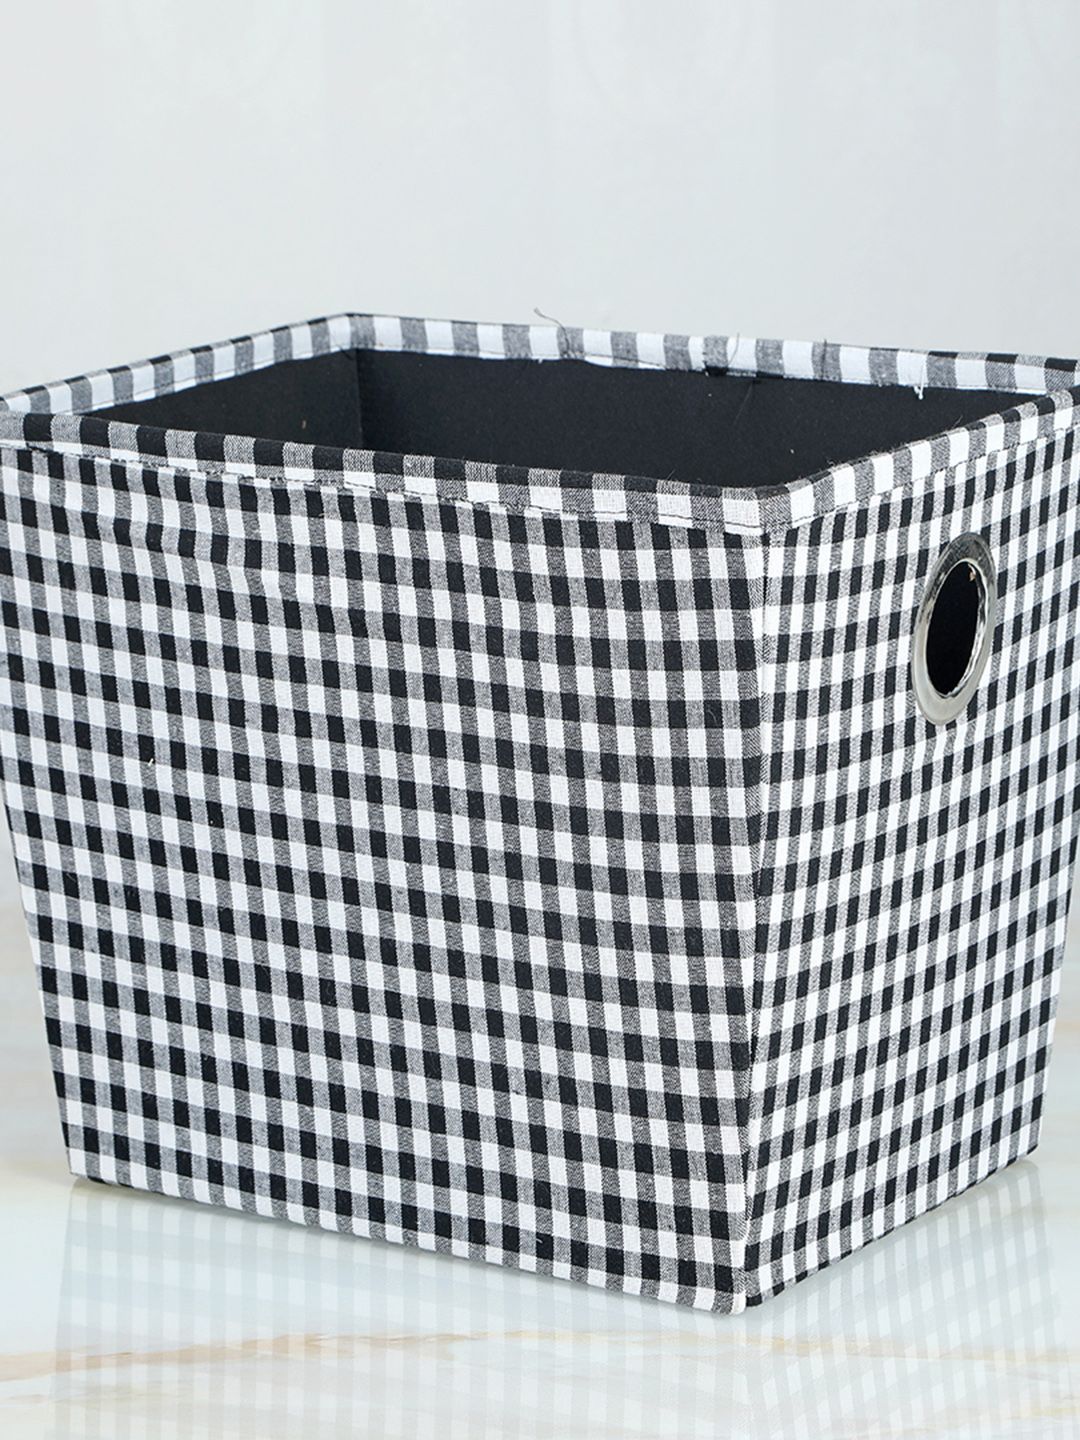 My gift booth Black & White Check Towel Basket Price in India